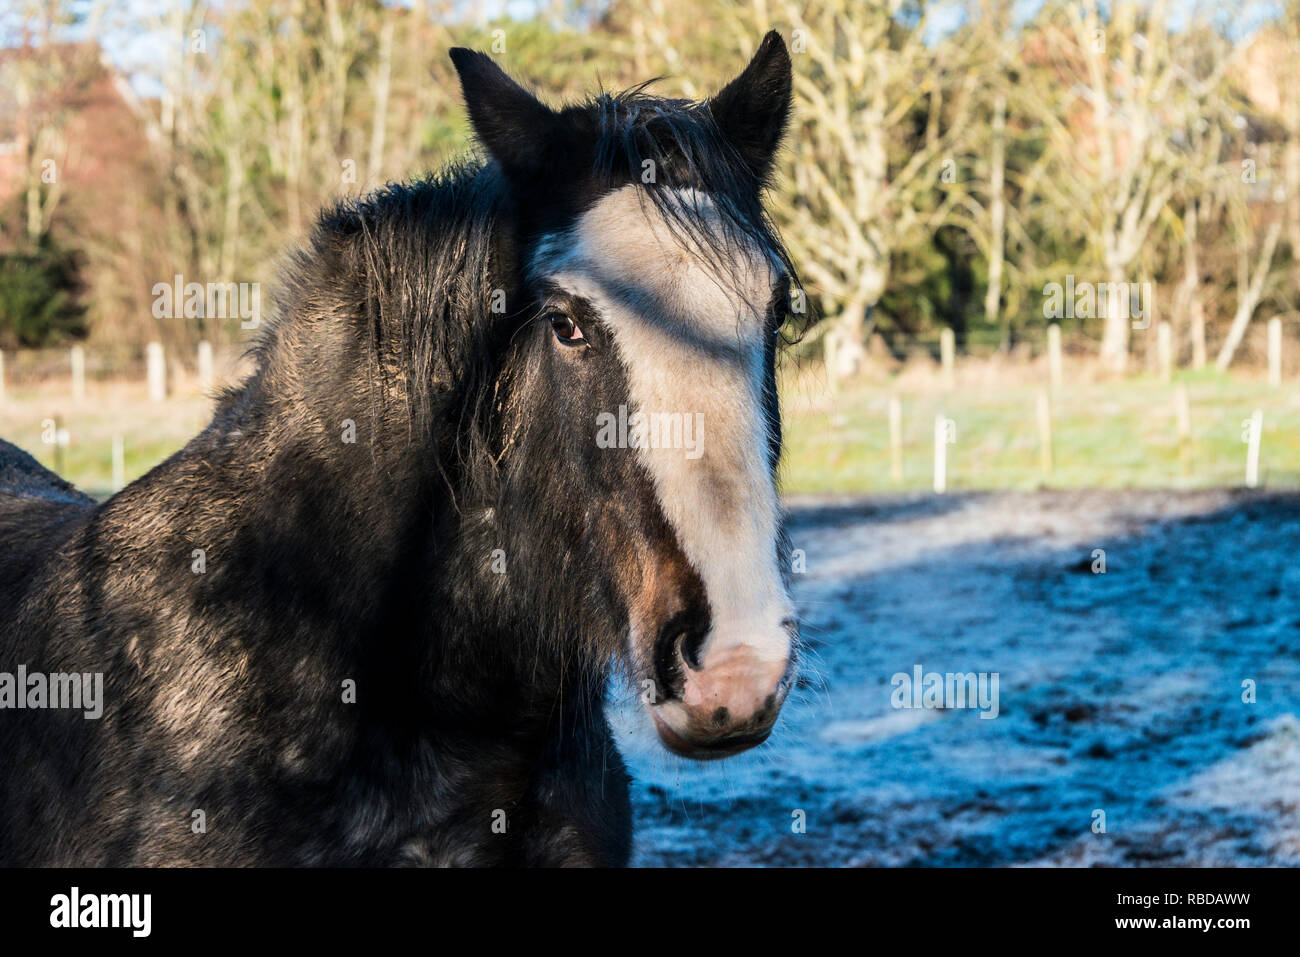 A Clydesdale horse in a frost covered field Stock Photo